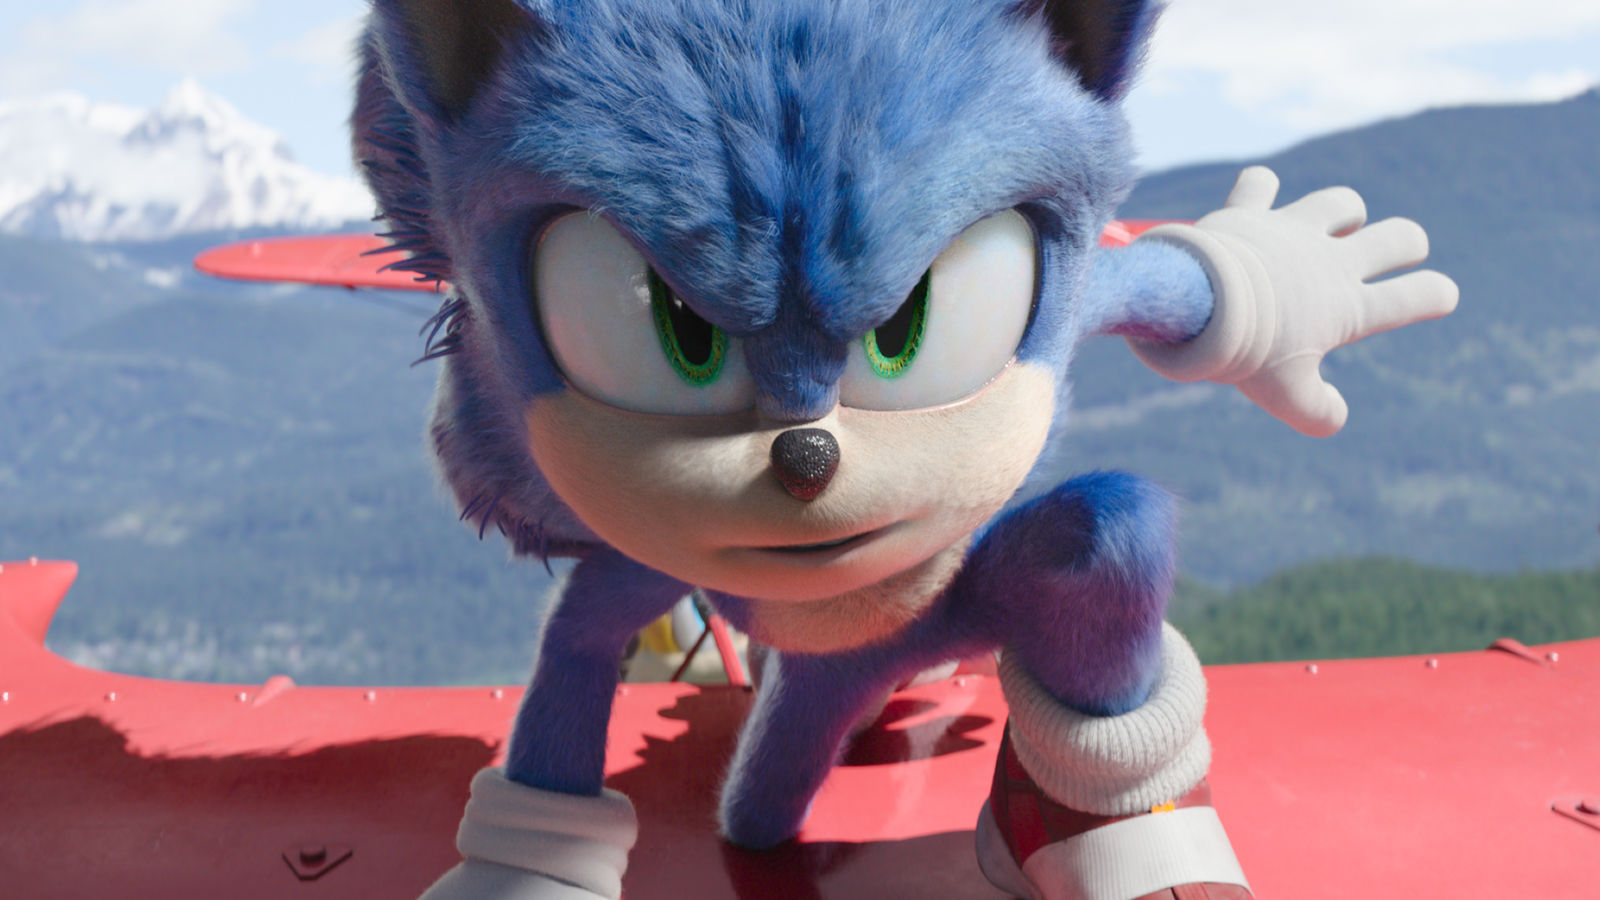 Sonic The Hedgehog 2 gets first trailer